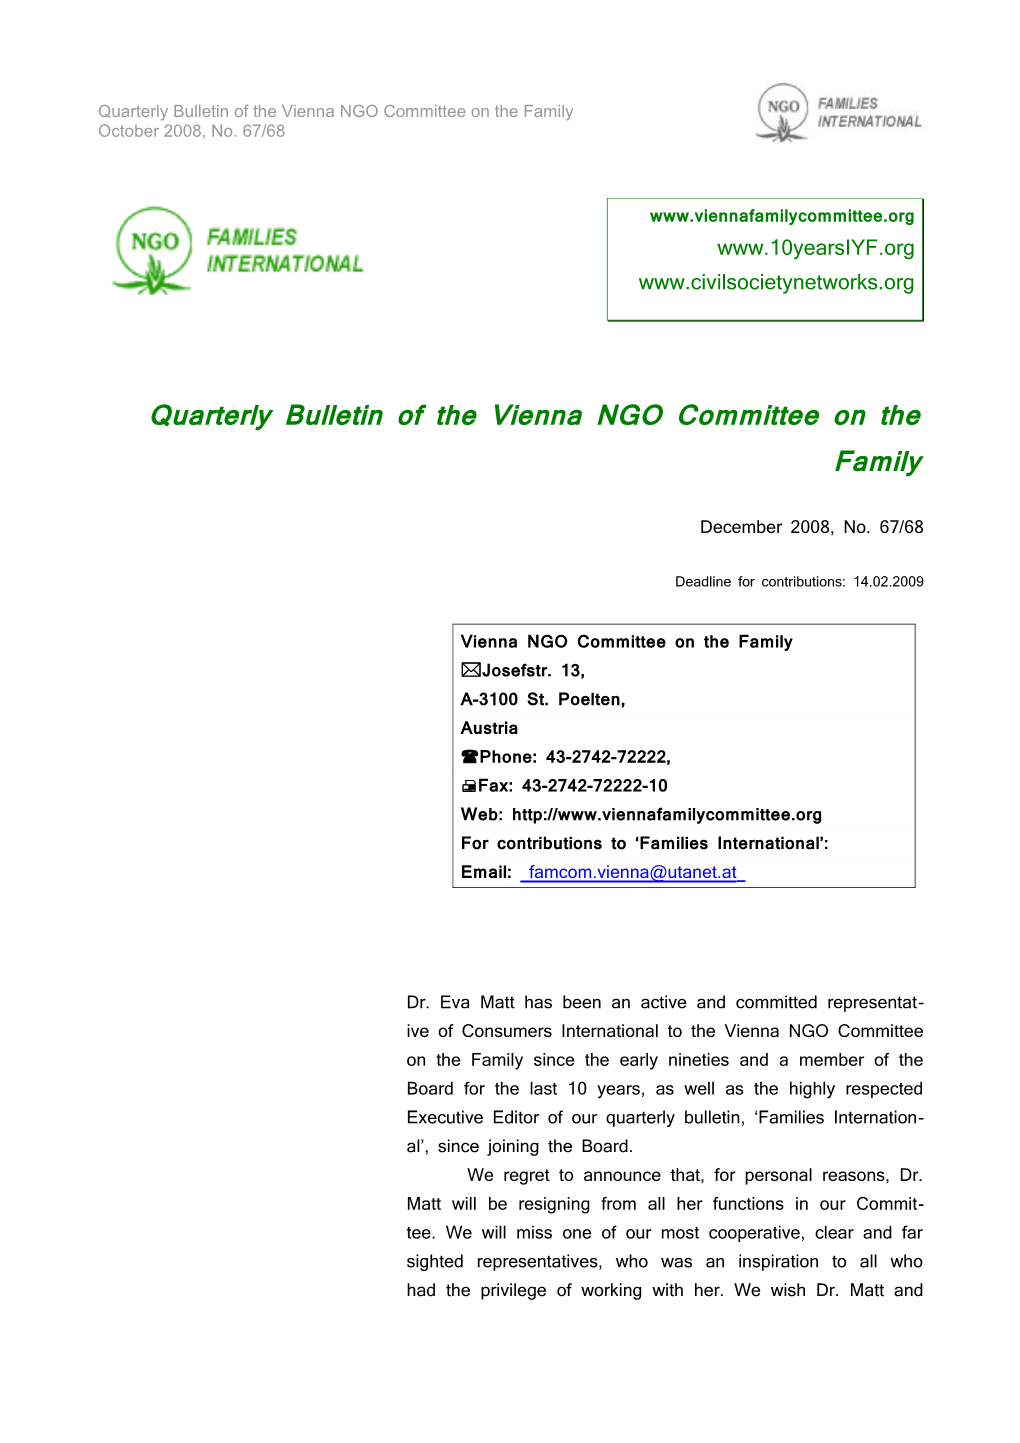 Quarterly Bulletin of the NGO Committee on the Family